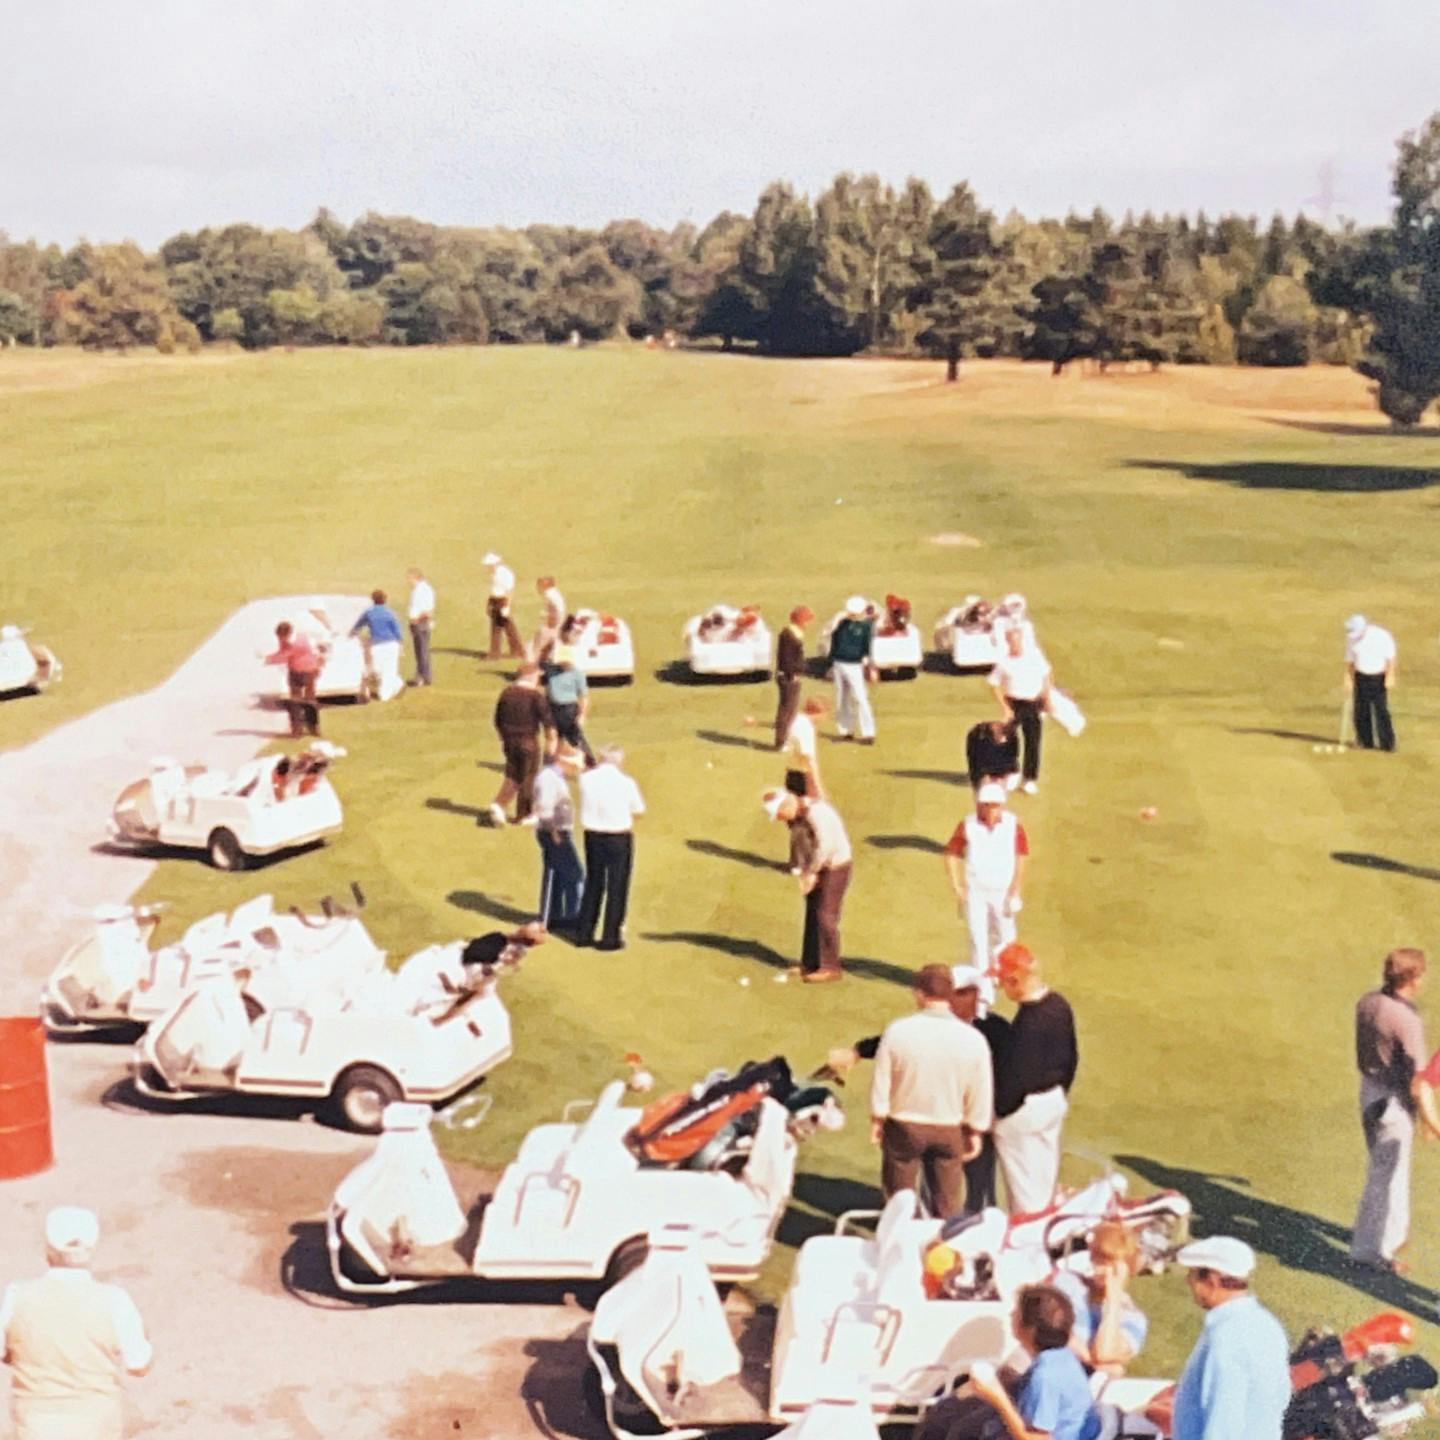 Golf cart design peaked in the early 1980s #3Wheelers #LSGHistory #PlayTheLake